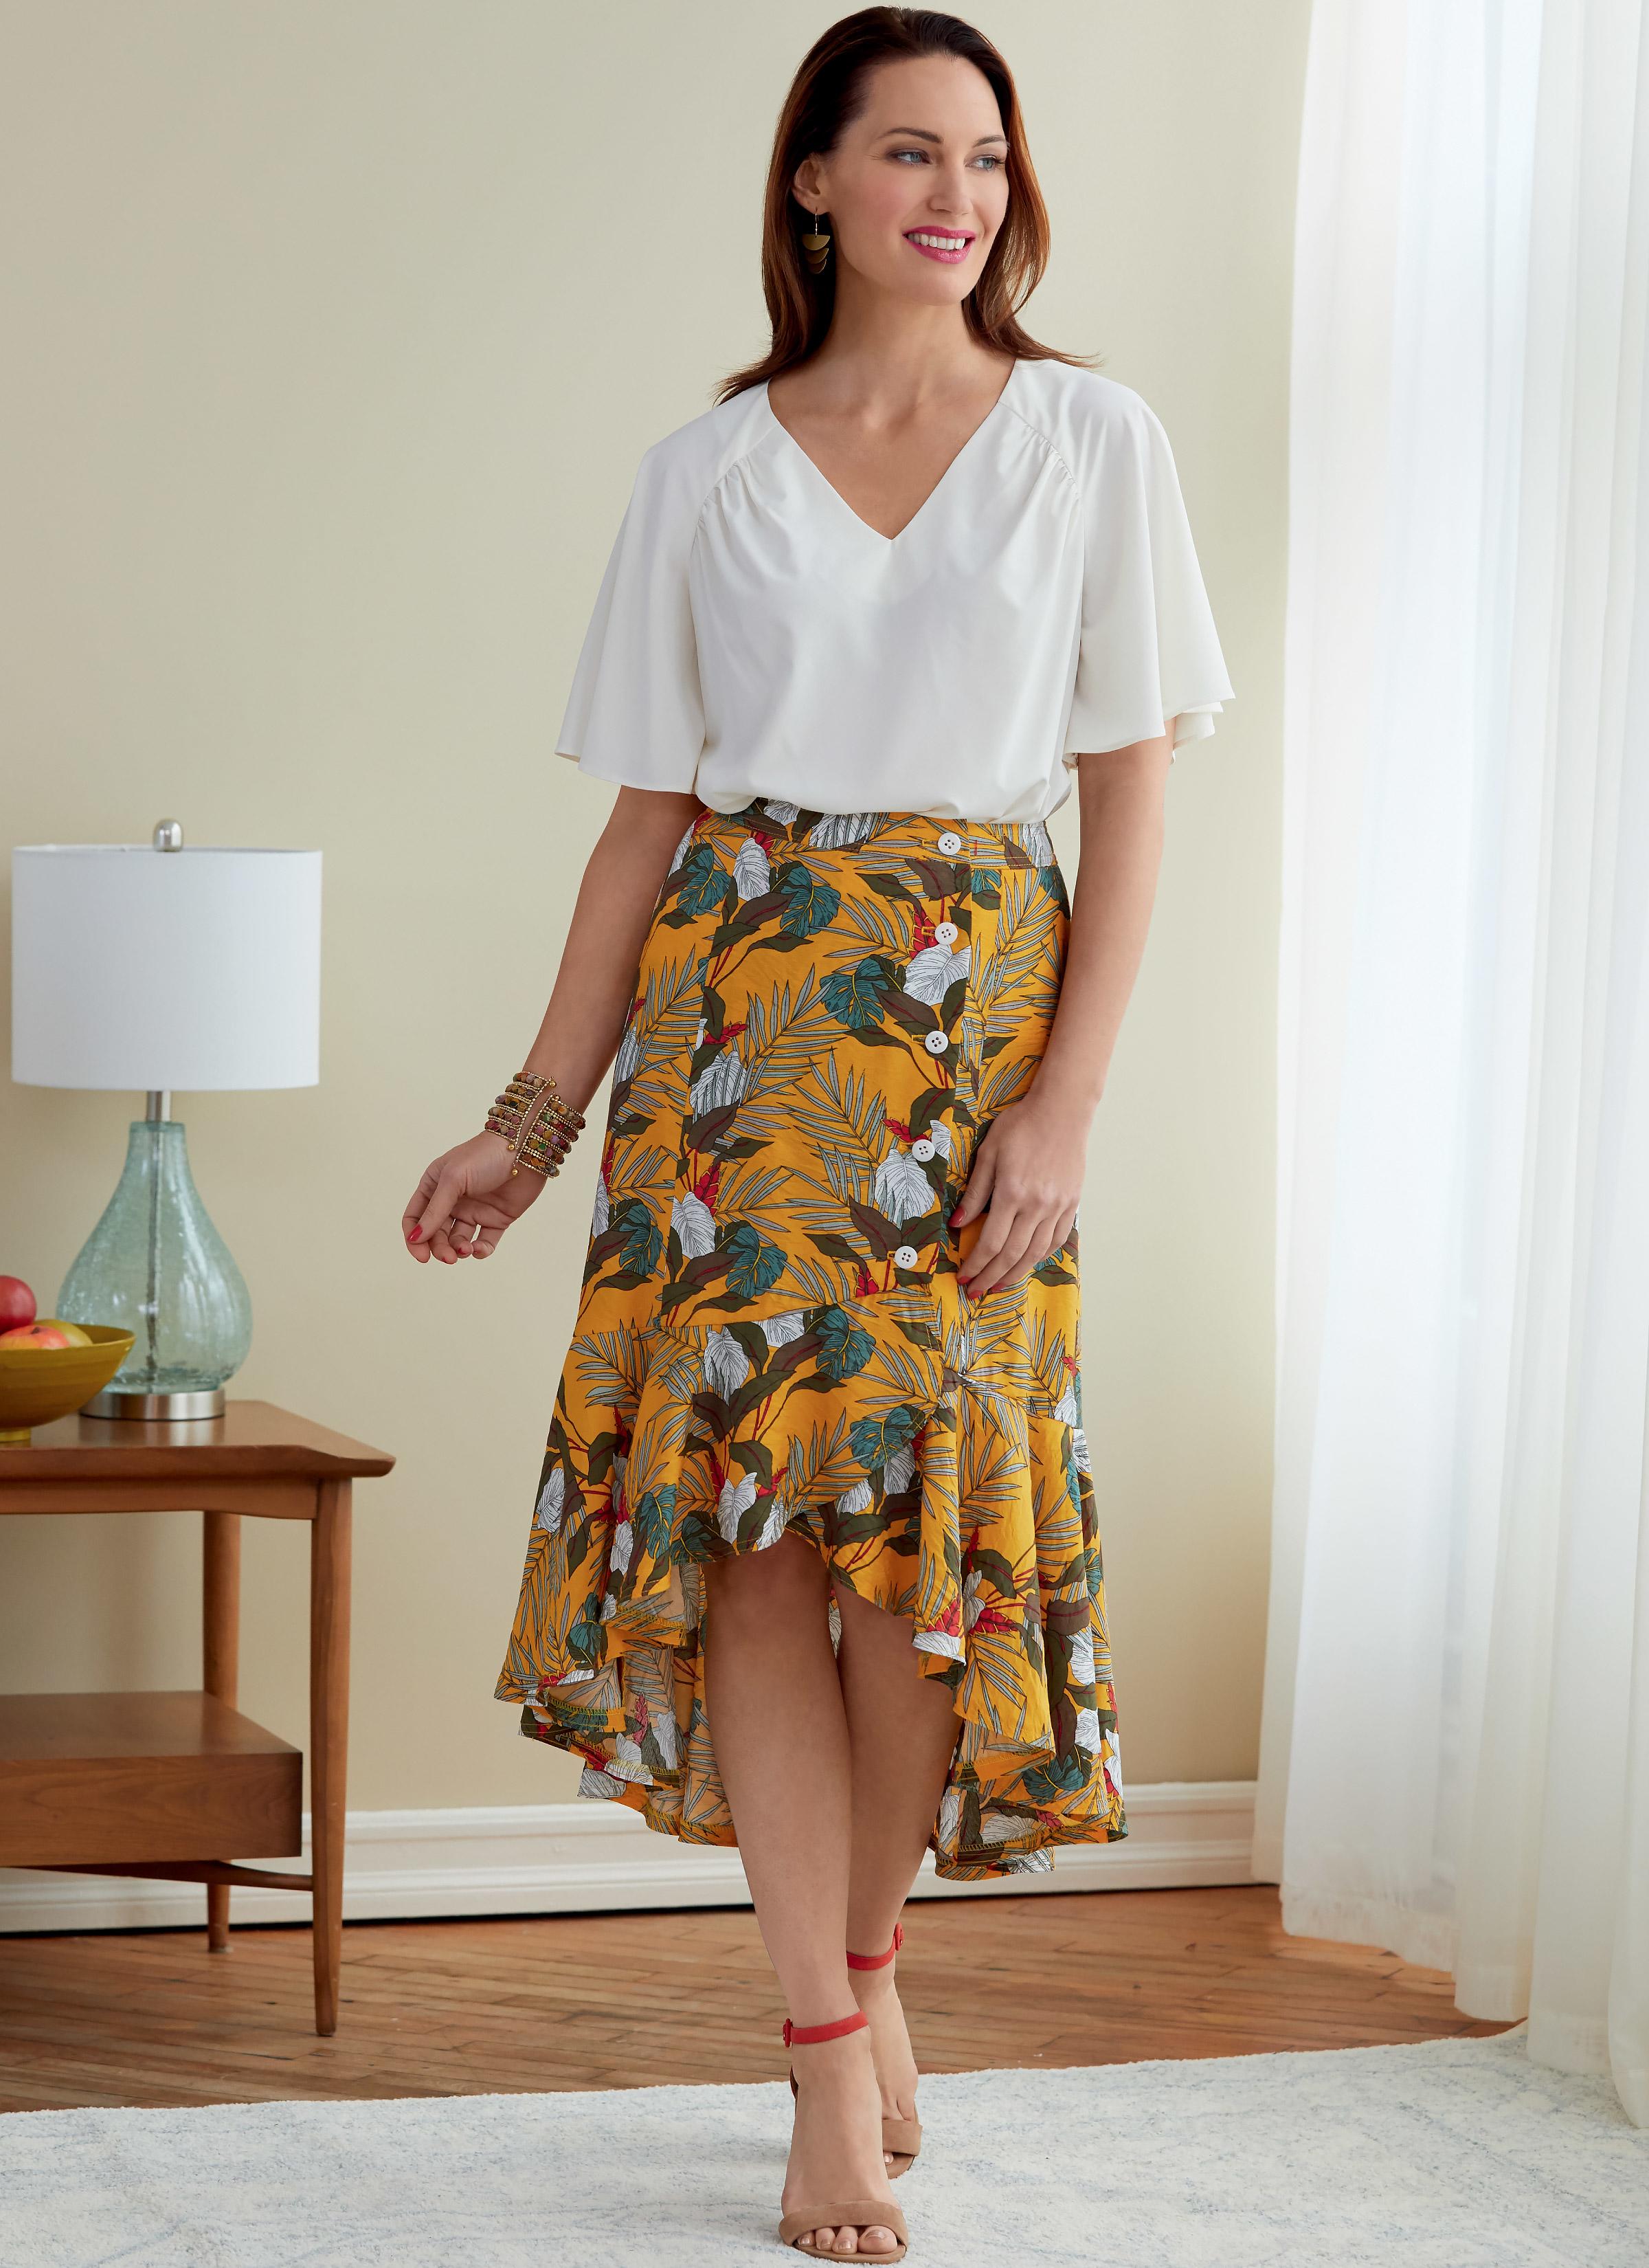 Butterick B6770 Misses' Tops and Sash